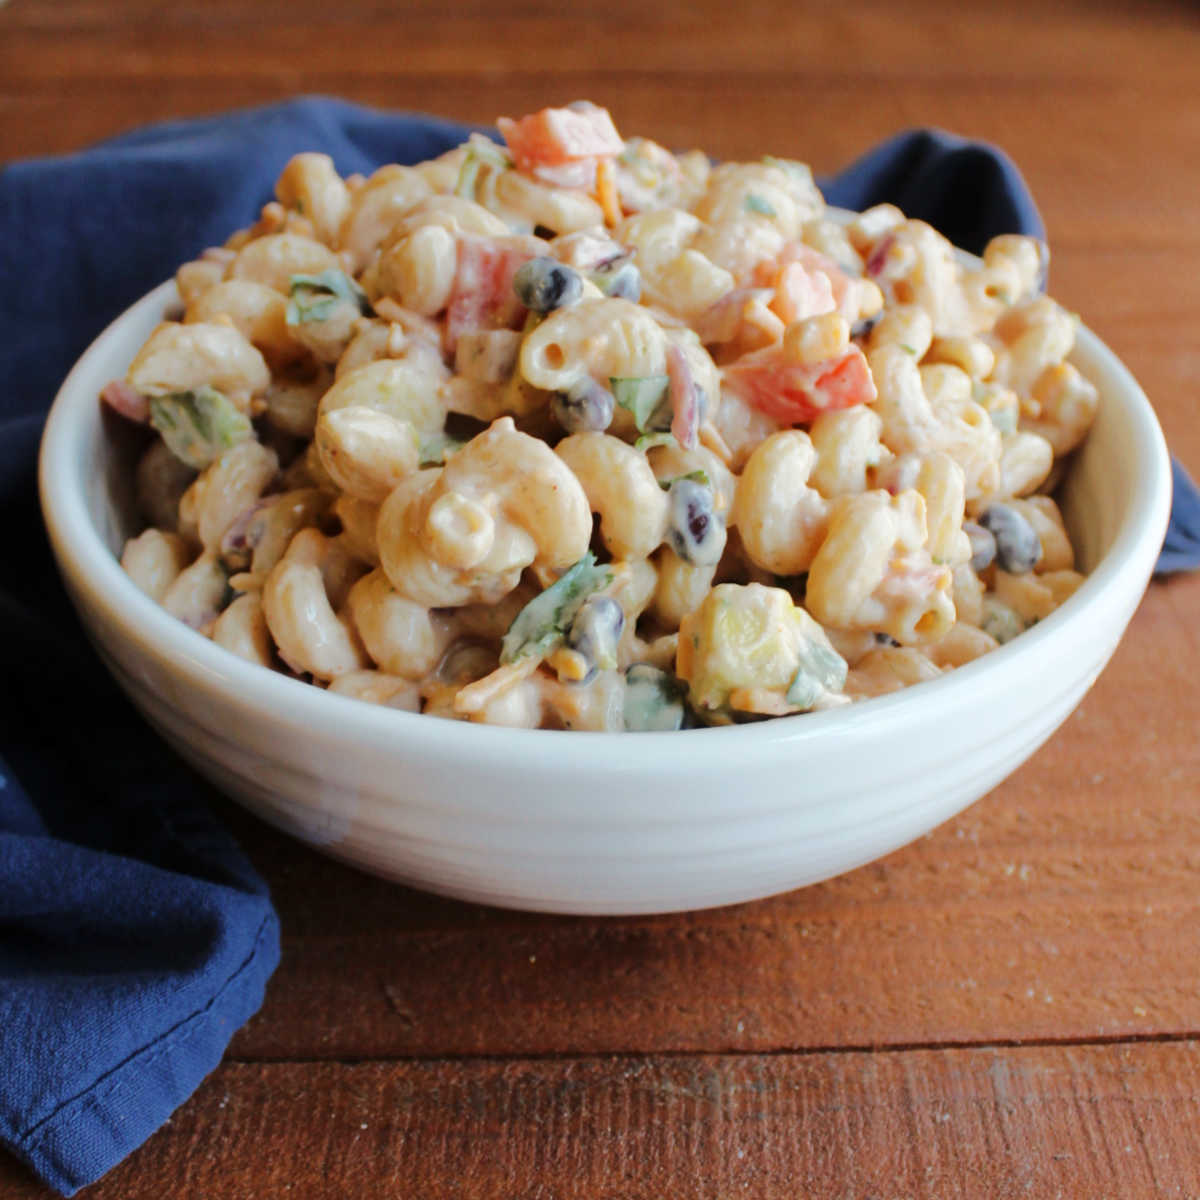 Serving bowl filled with bbq ranch macaroni salad with black beans, tomatoes, corn and more.